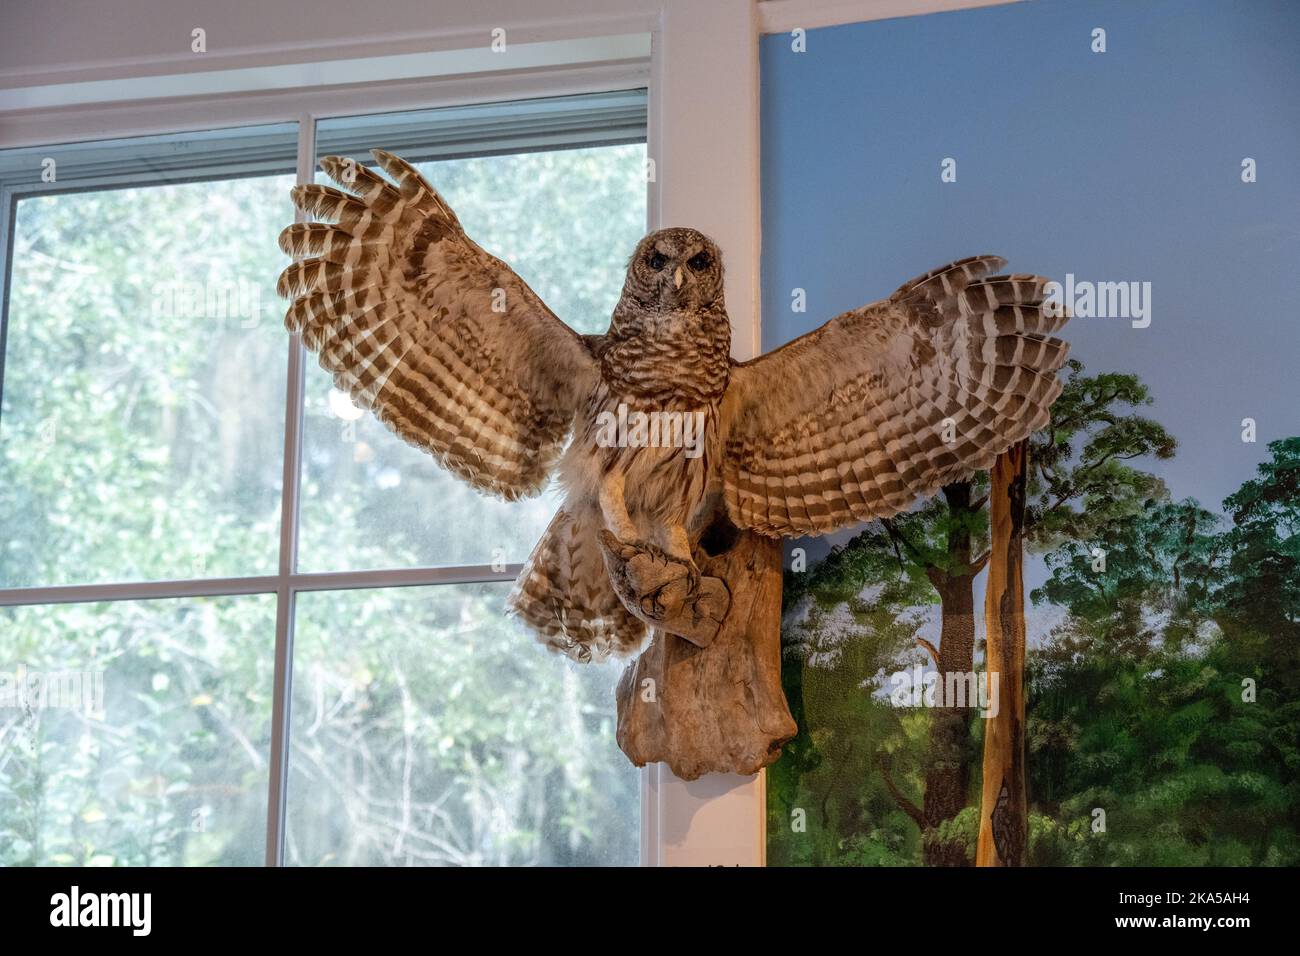 A taxidermy owl on display at the Coastal Discovery Museum Stock Photo